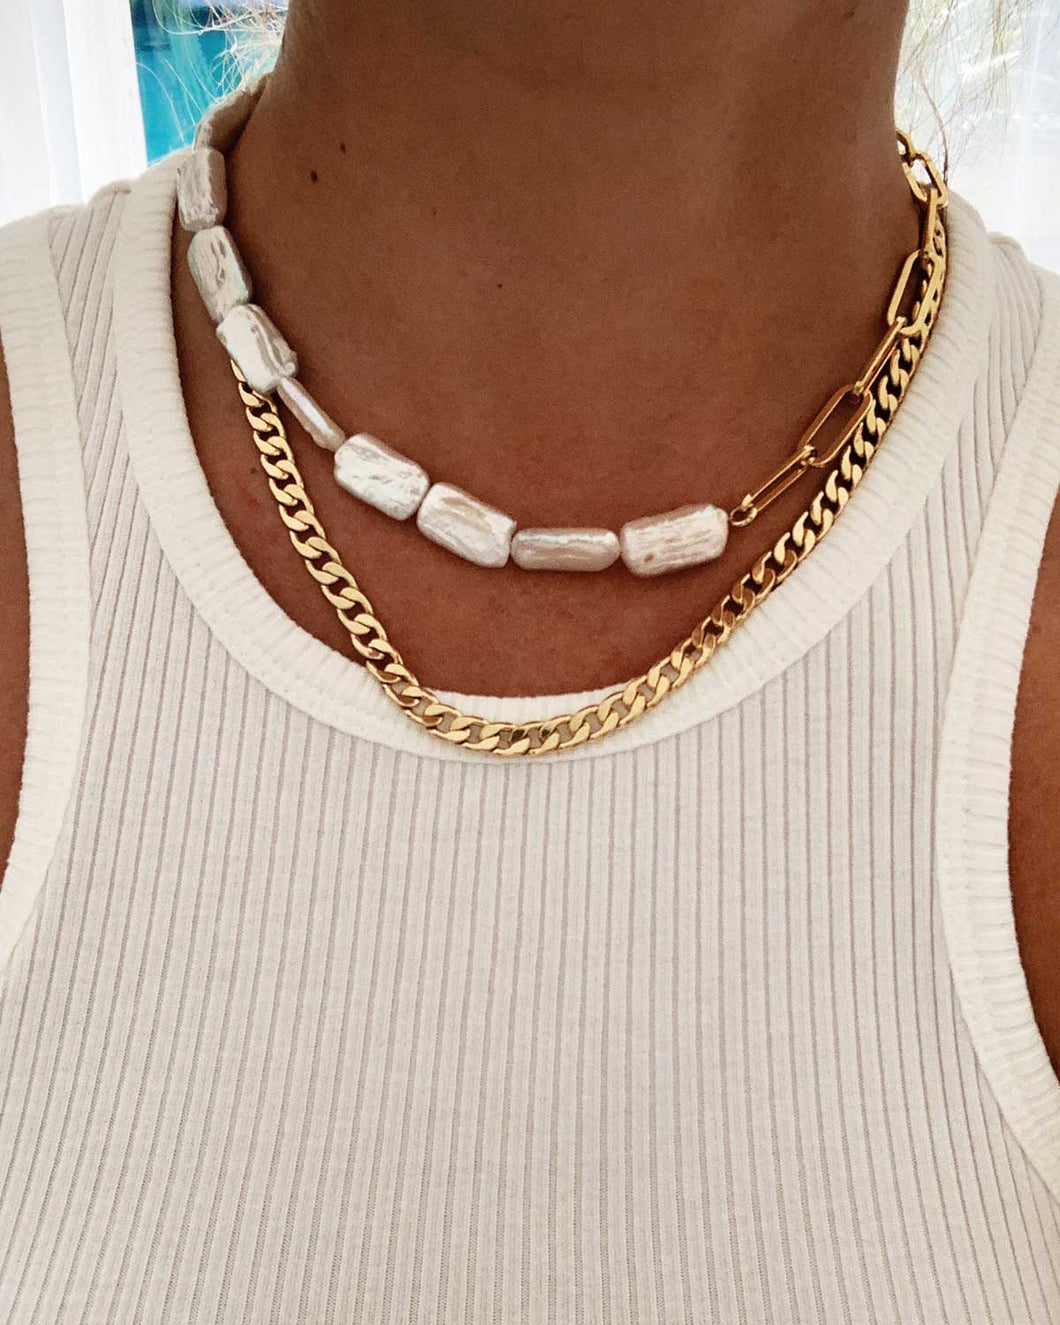 Elevate your style with this trendy half pearl half chain necklace. Featuring rectangular freshwater pearls and a fashionable paper clip chain, it can be worn as a choker or a short necklace. Versatile and timeless, it's the perfect accessory for any occasion.